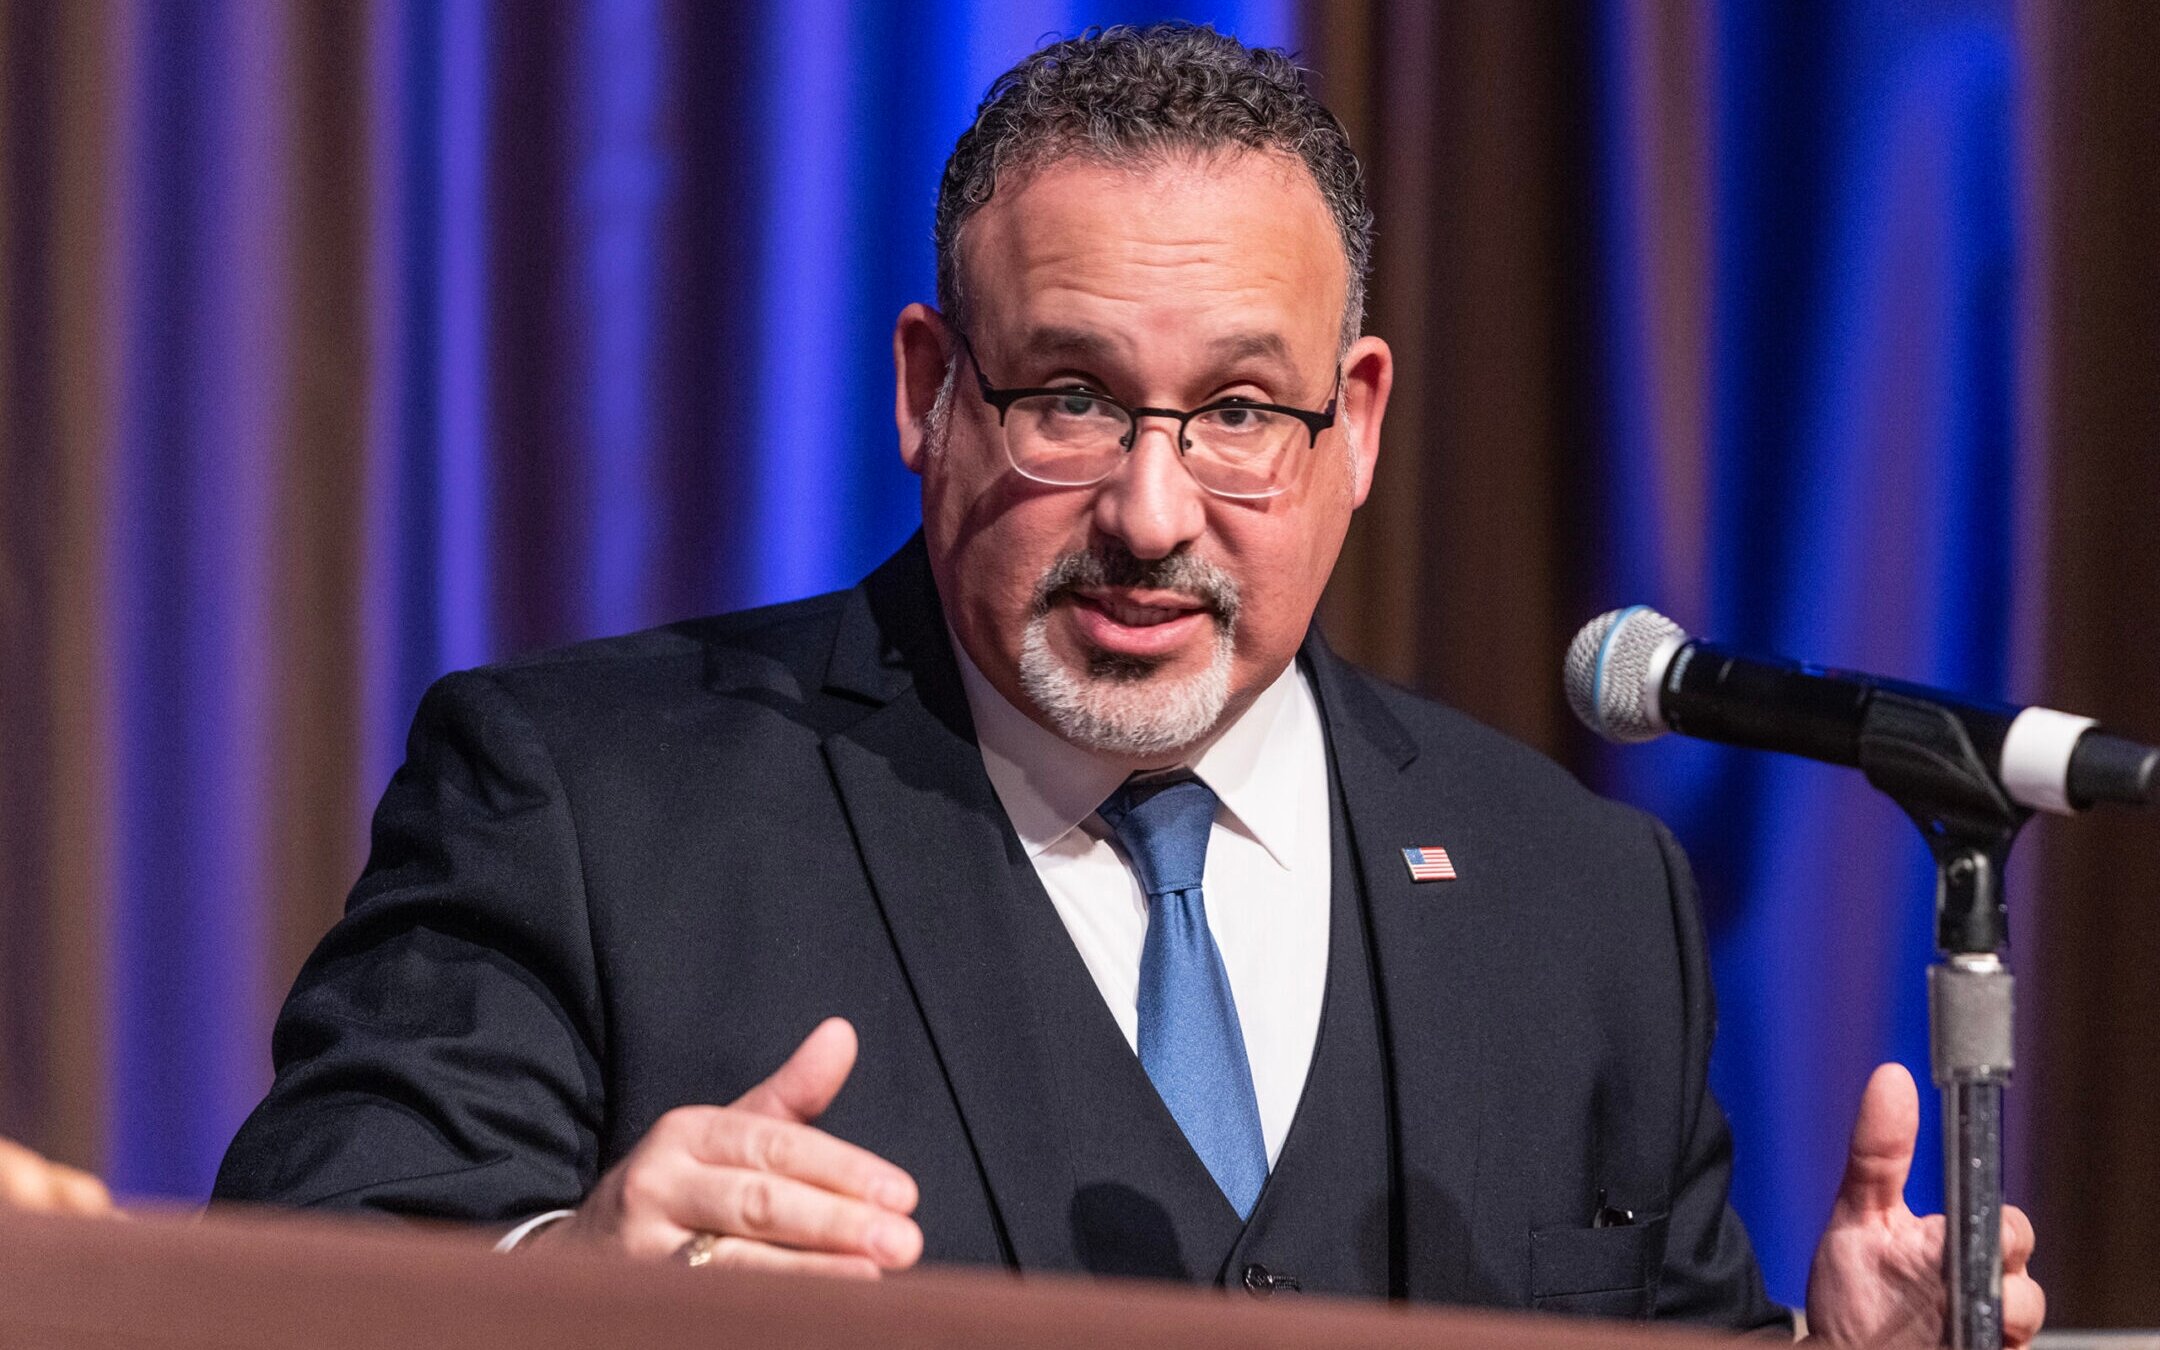 Miguel Cardona, secretary of the U.S. Department of Education, participates in a public event in New York City, April 12, 2023. (Lev Radin/Pacific Press/LightRocket via Getty Images)